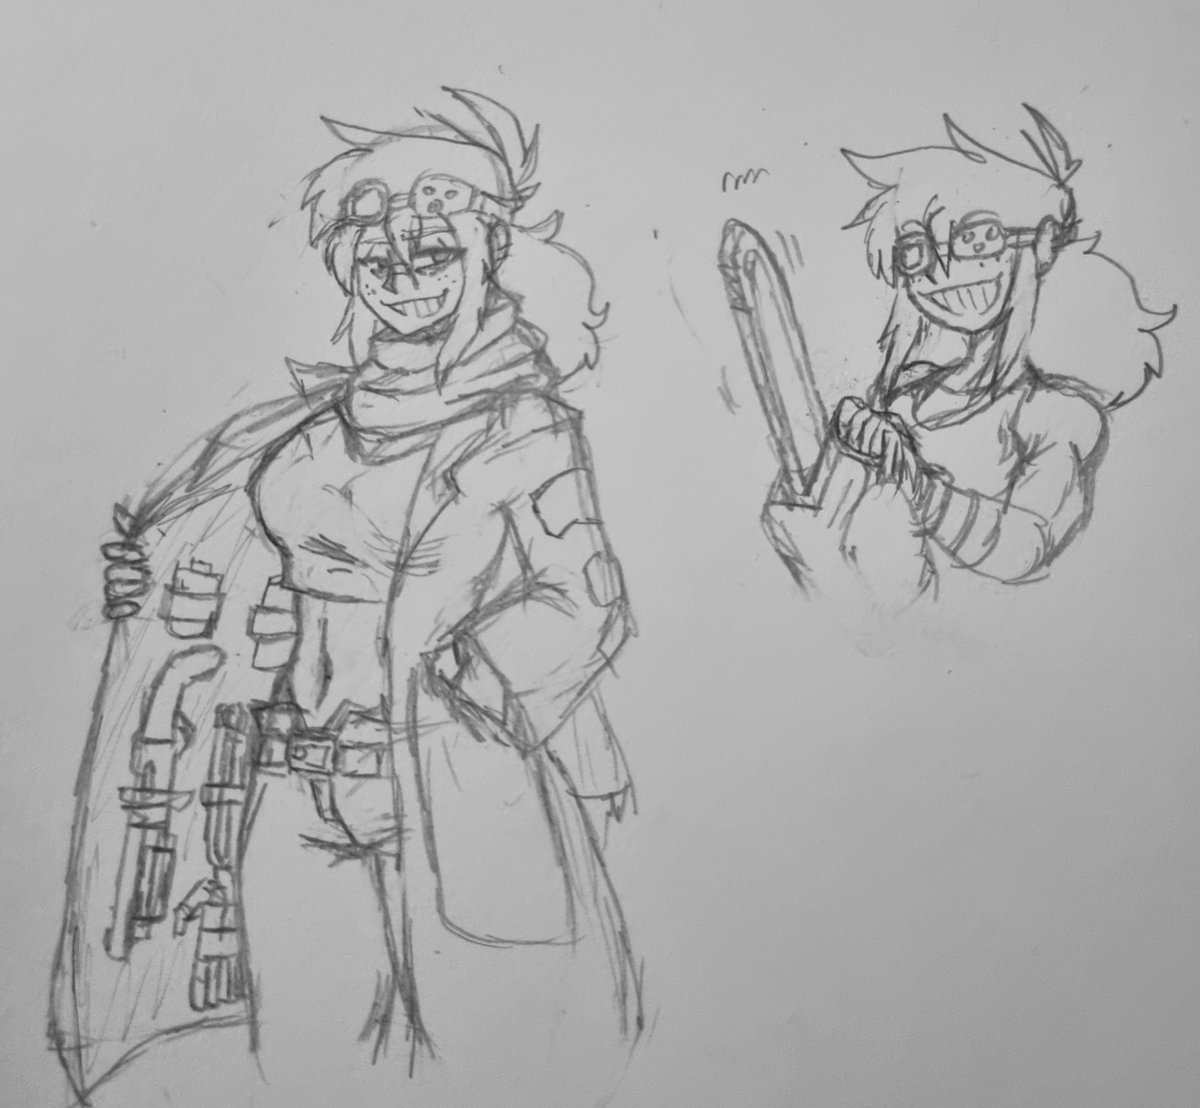 repurposing old ocs:
Kyouko is a mechanic, black market arms/tech dealer, and unlicensed cybernetics practitioner. she repairs her husband's Satyr PCA, and repurposes or sells off any weapons or tech he gets while contracted. wouldnt recommend getting augments from her though...